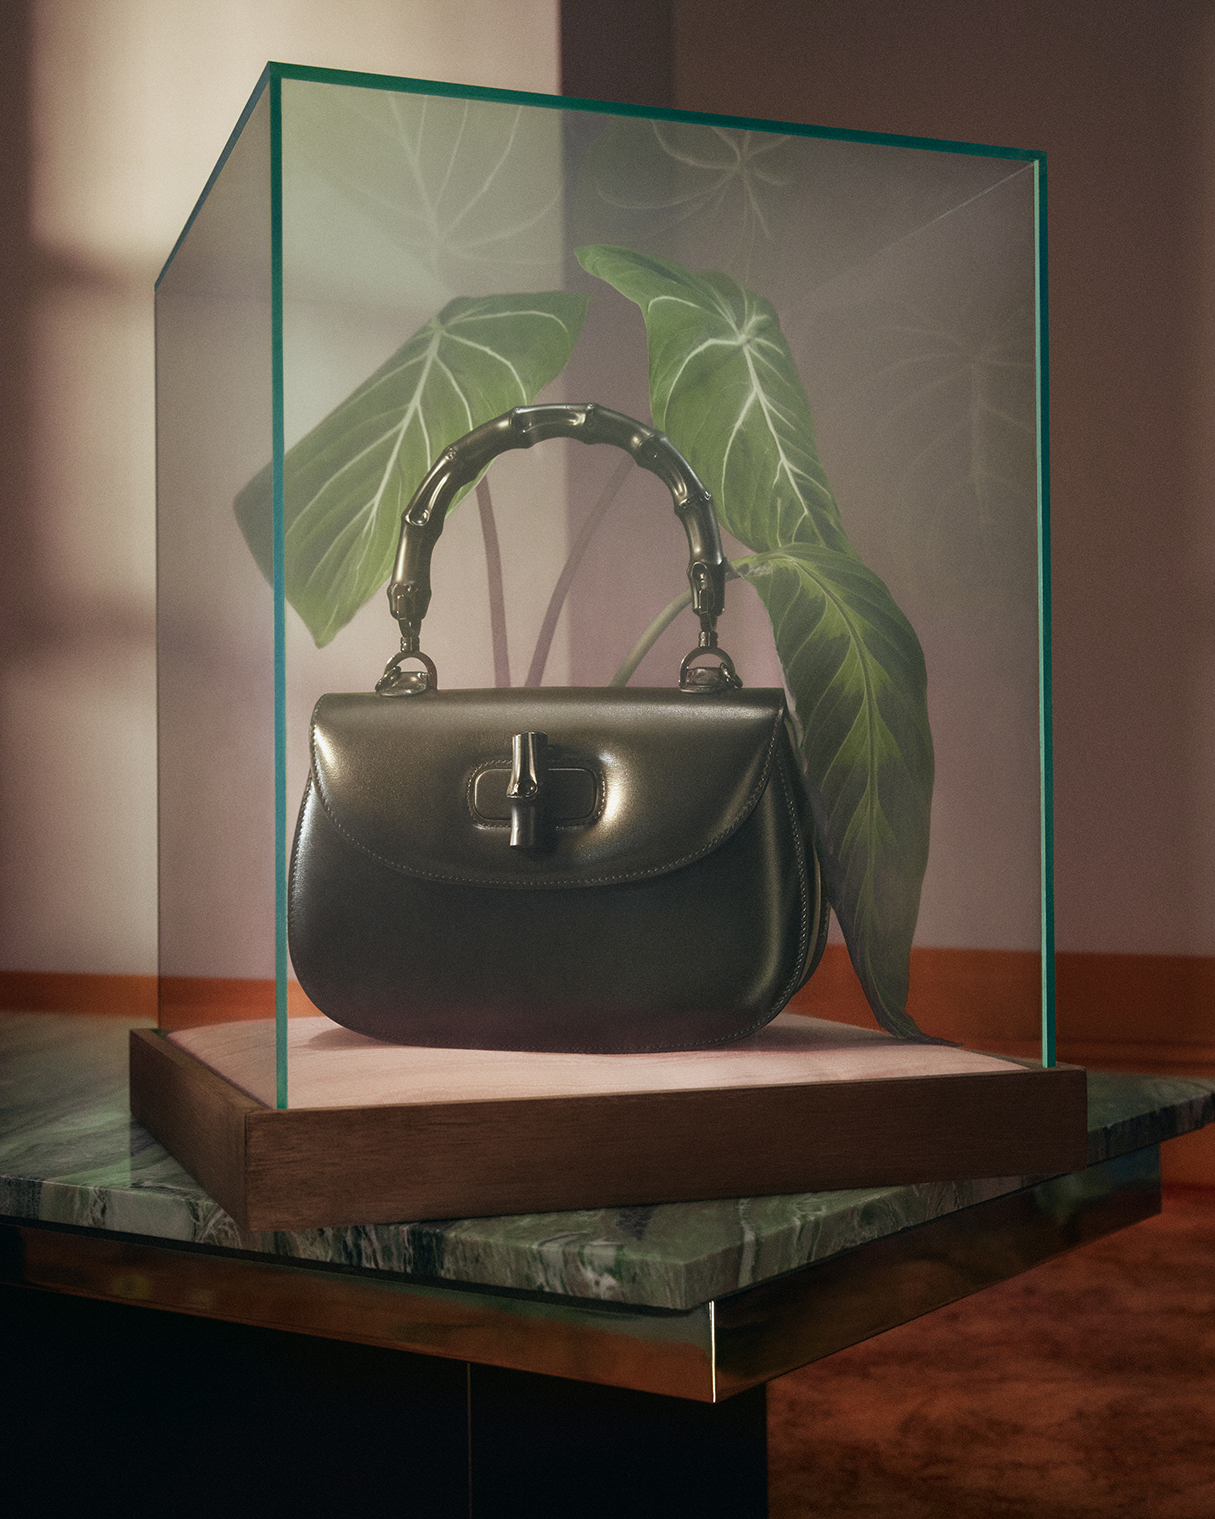 Gucci Bamboo 1947 Bag Meet The Newest Gucci Bag  Learn Its History   StyleCaster